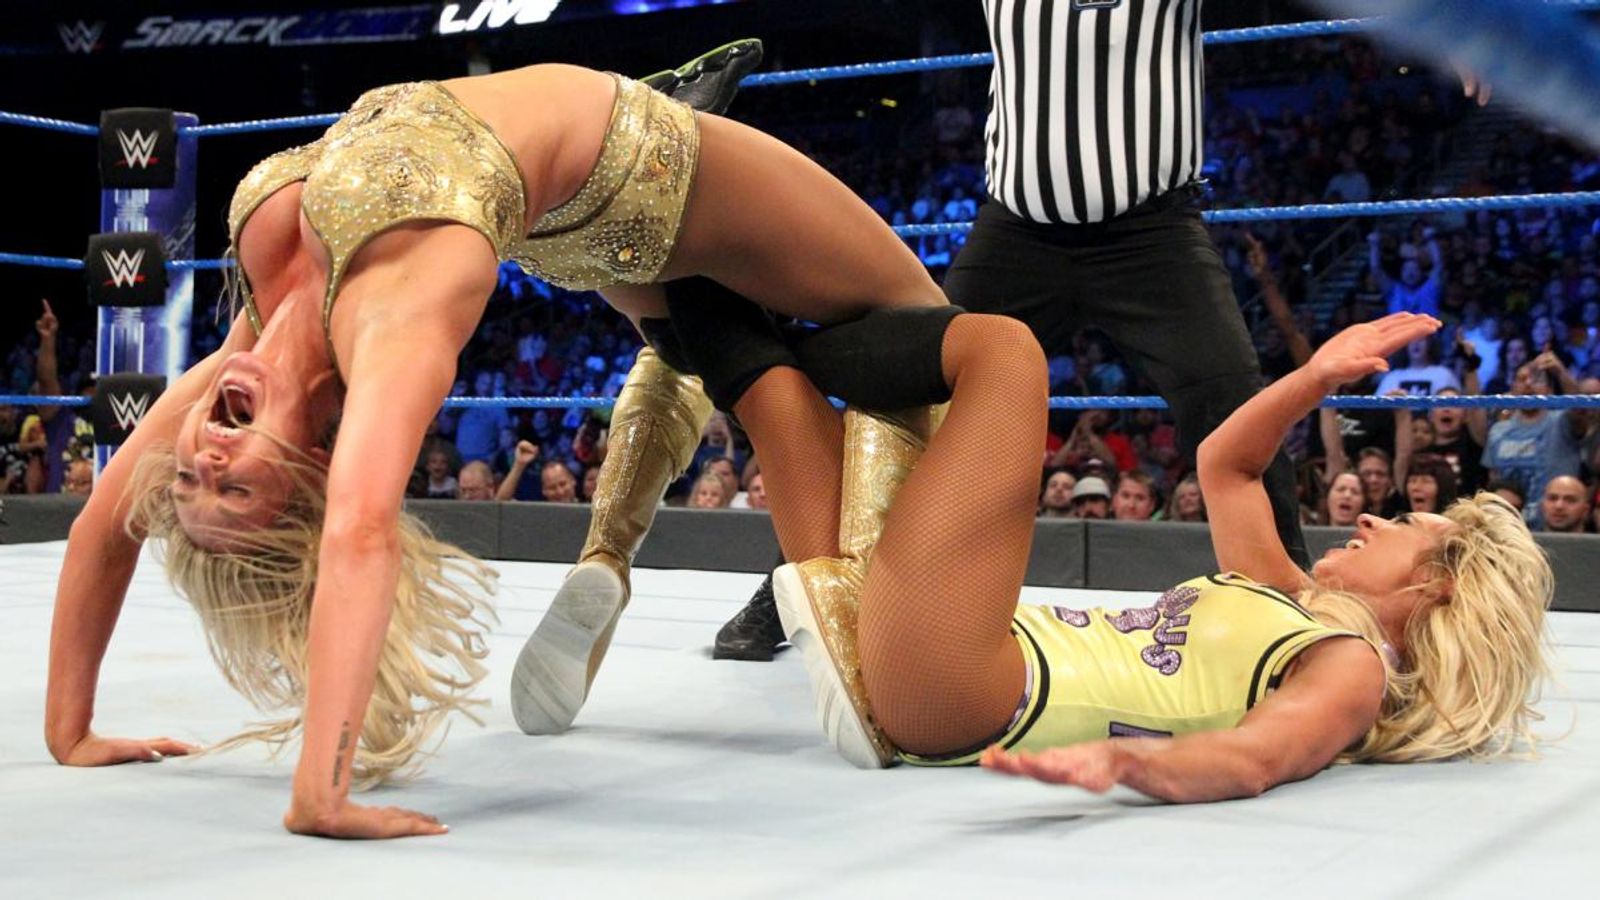 "Charlotte Flair" 
6. "WWE SmackDown" - wide 7